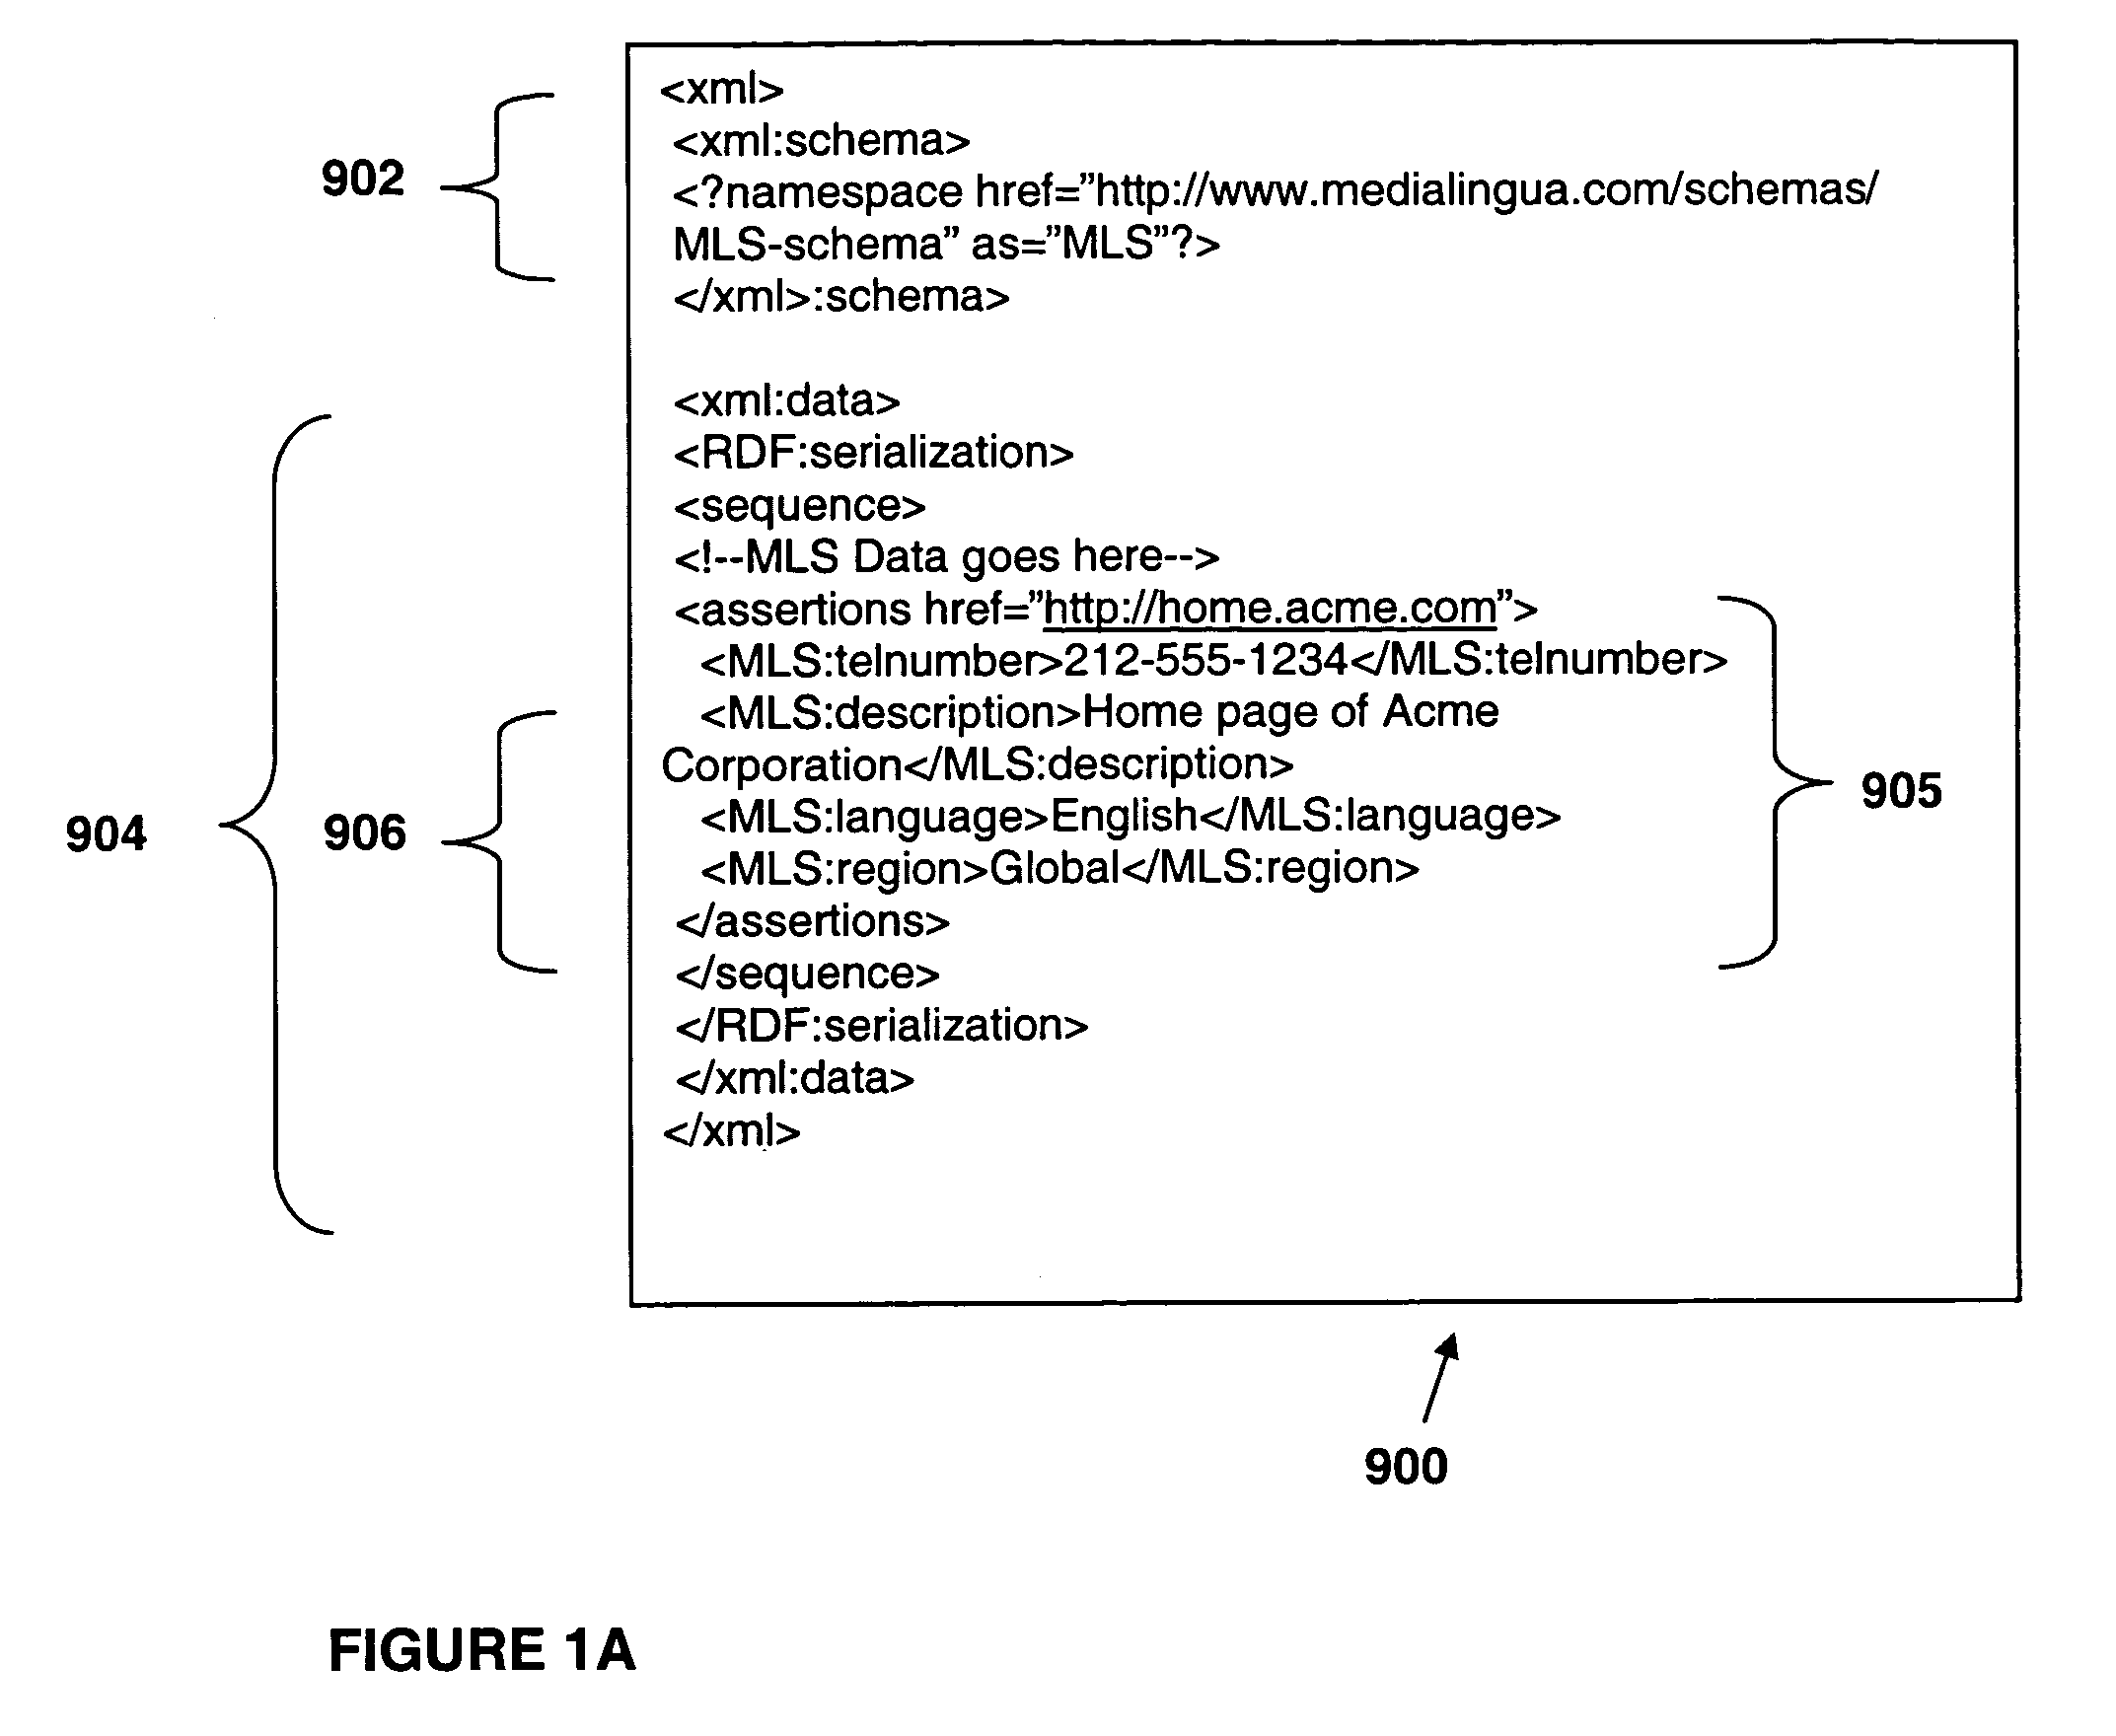 Method for performing transactional communication using a universal transaction account identifier assigned to a customer